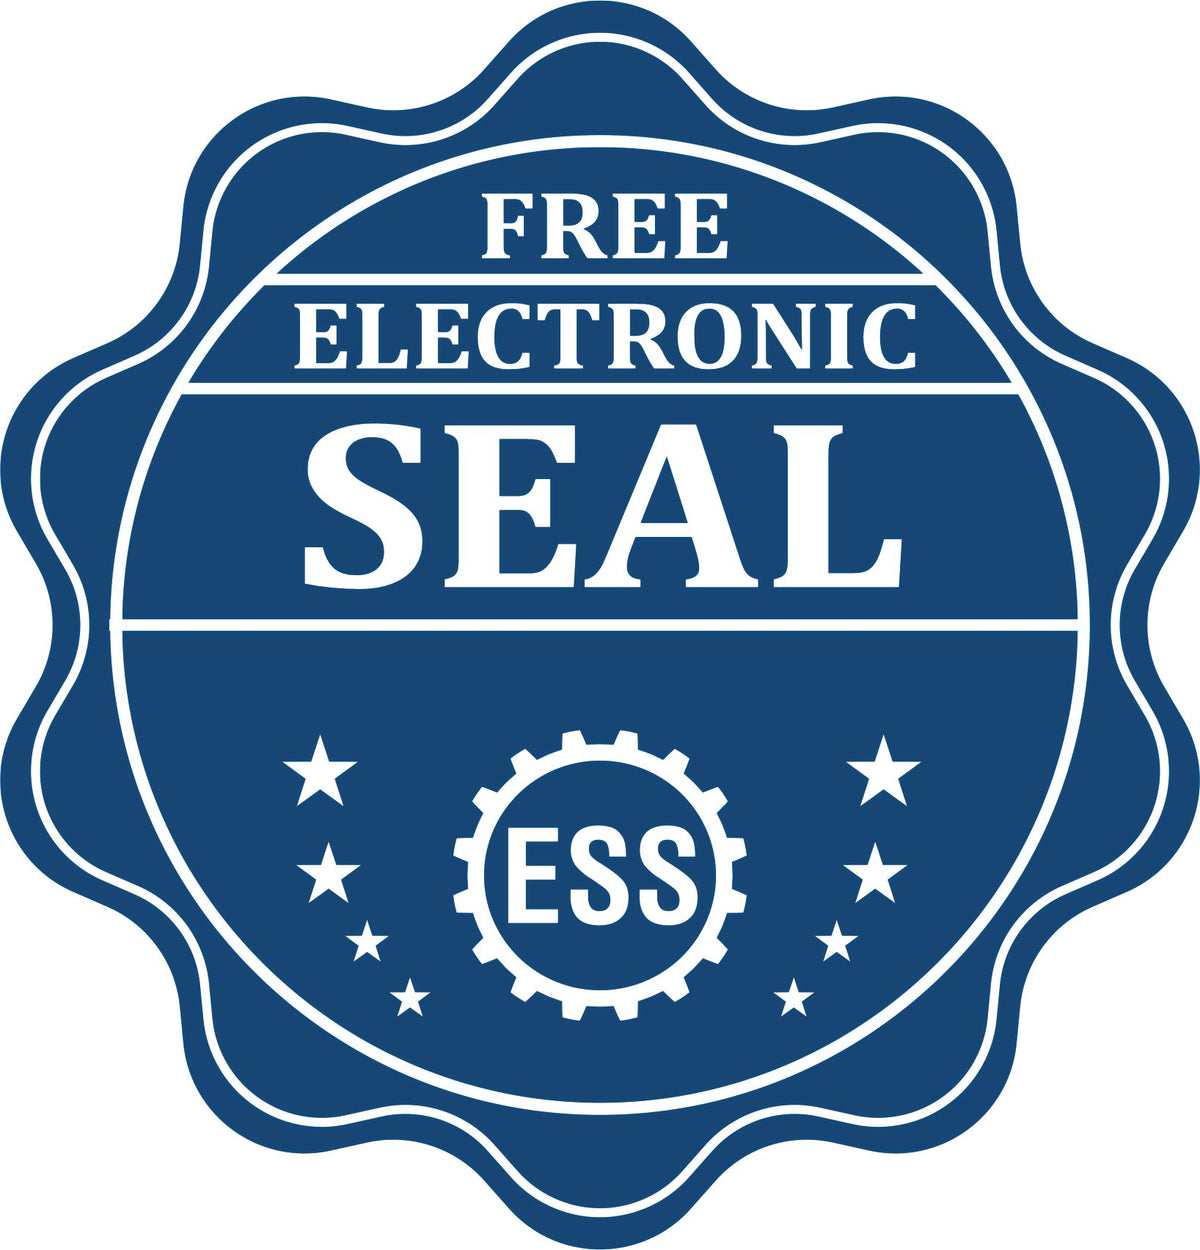 A badge showing a free electronic seal for the Handheld Rhode Island Architect Seal Embosser with stars and the ESS gear on the emblem.